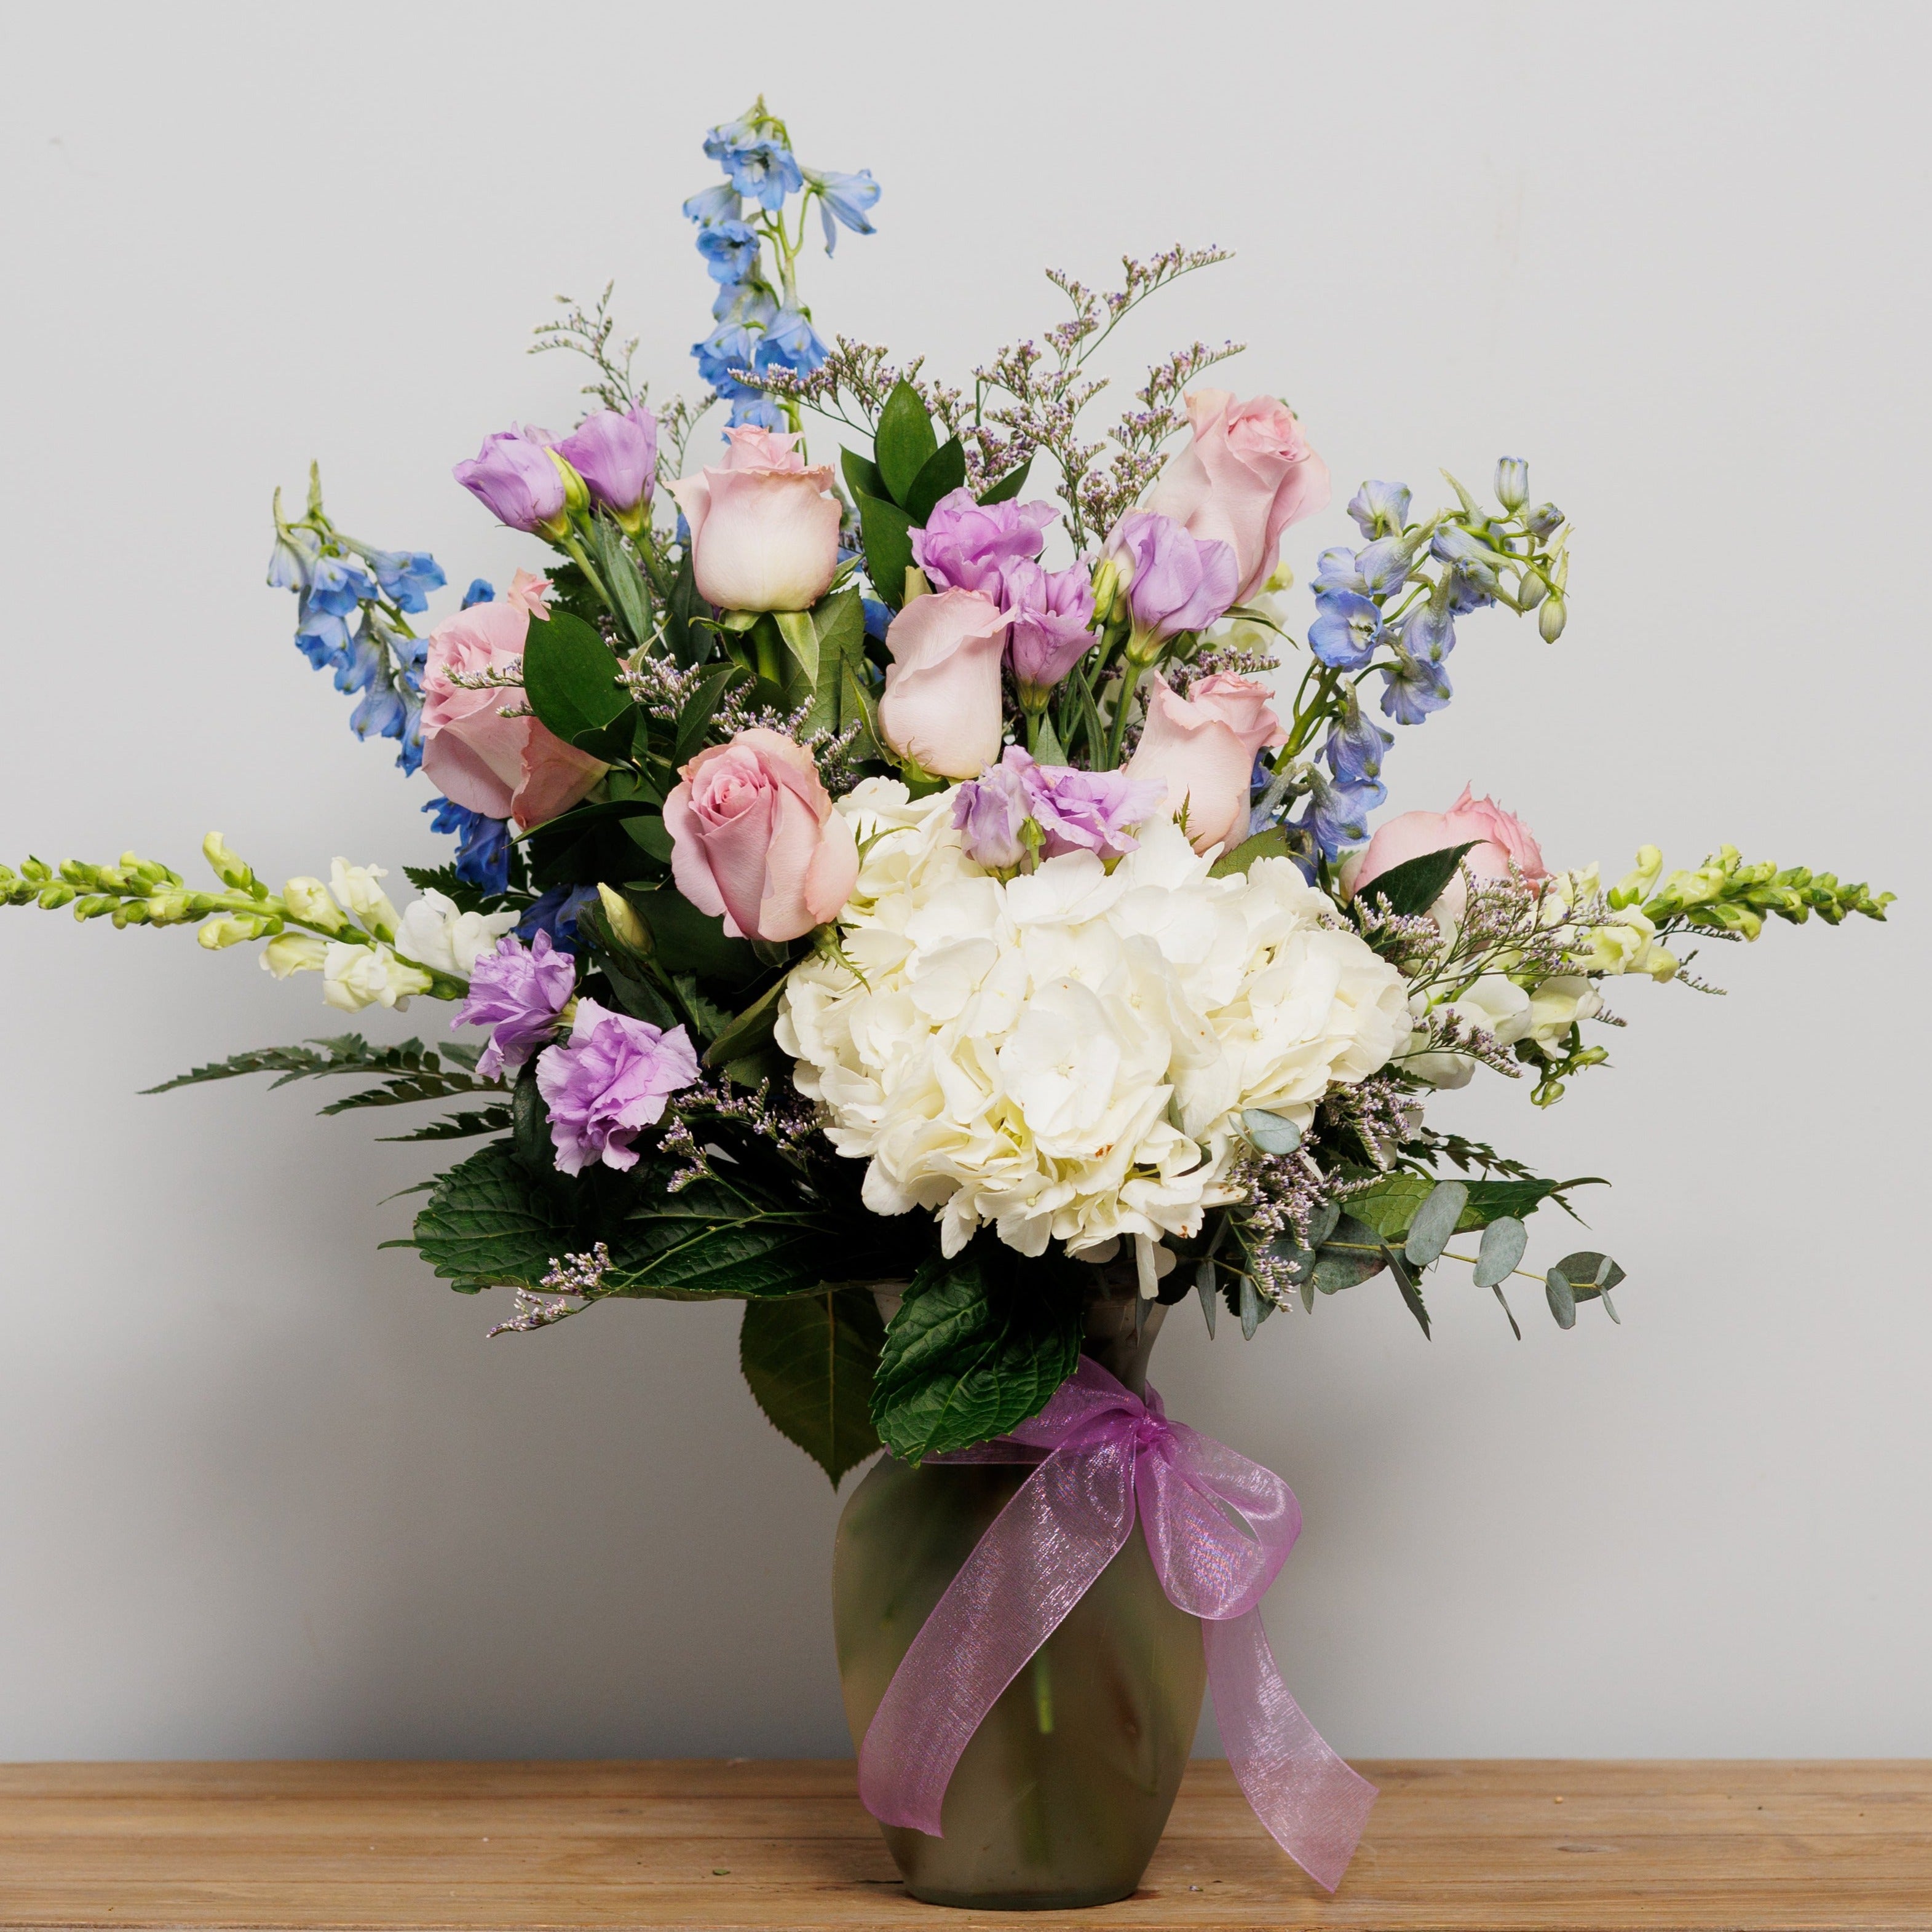 A flower arrangement with light blue, lavender and white.